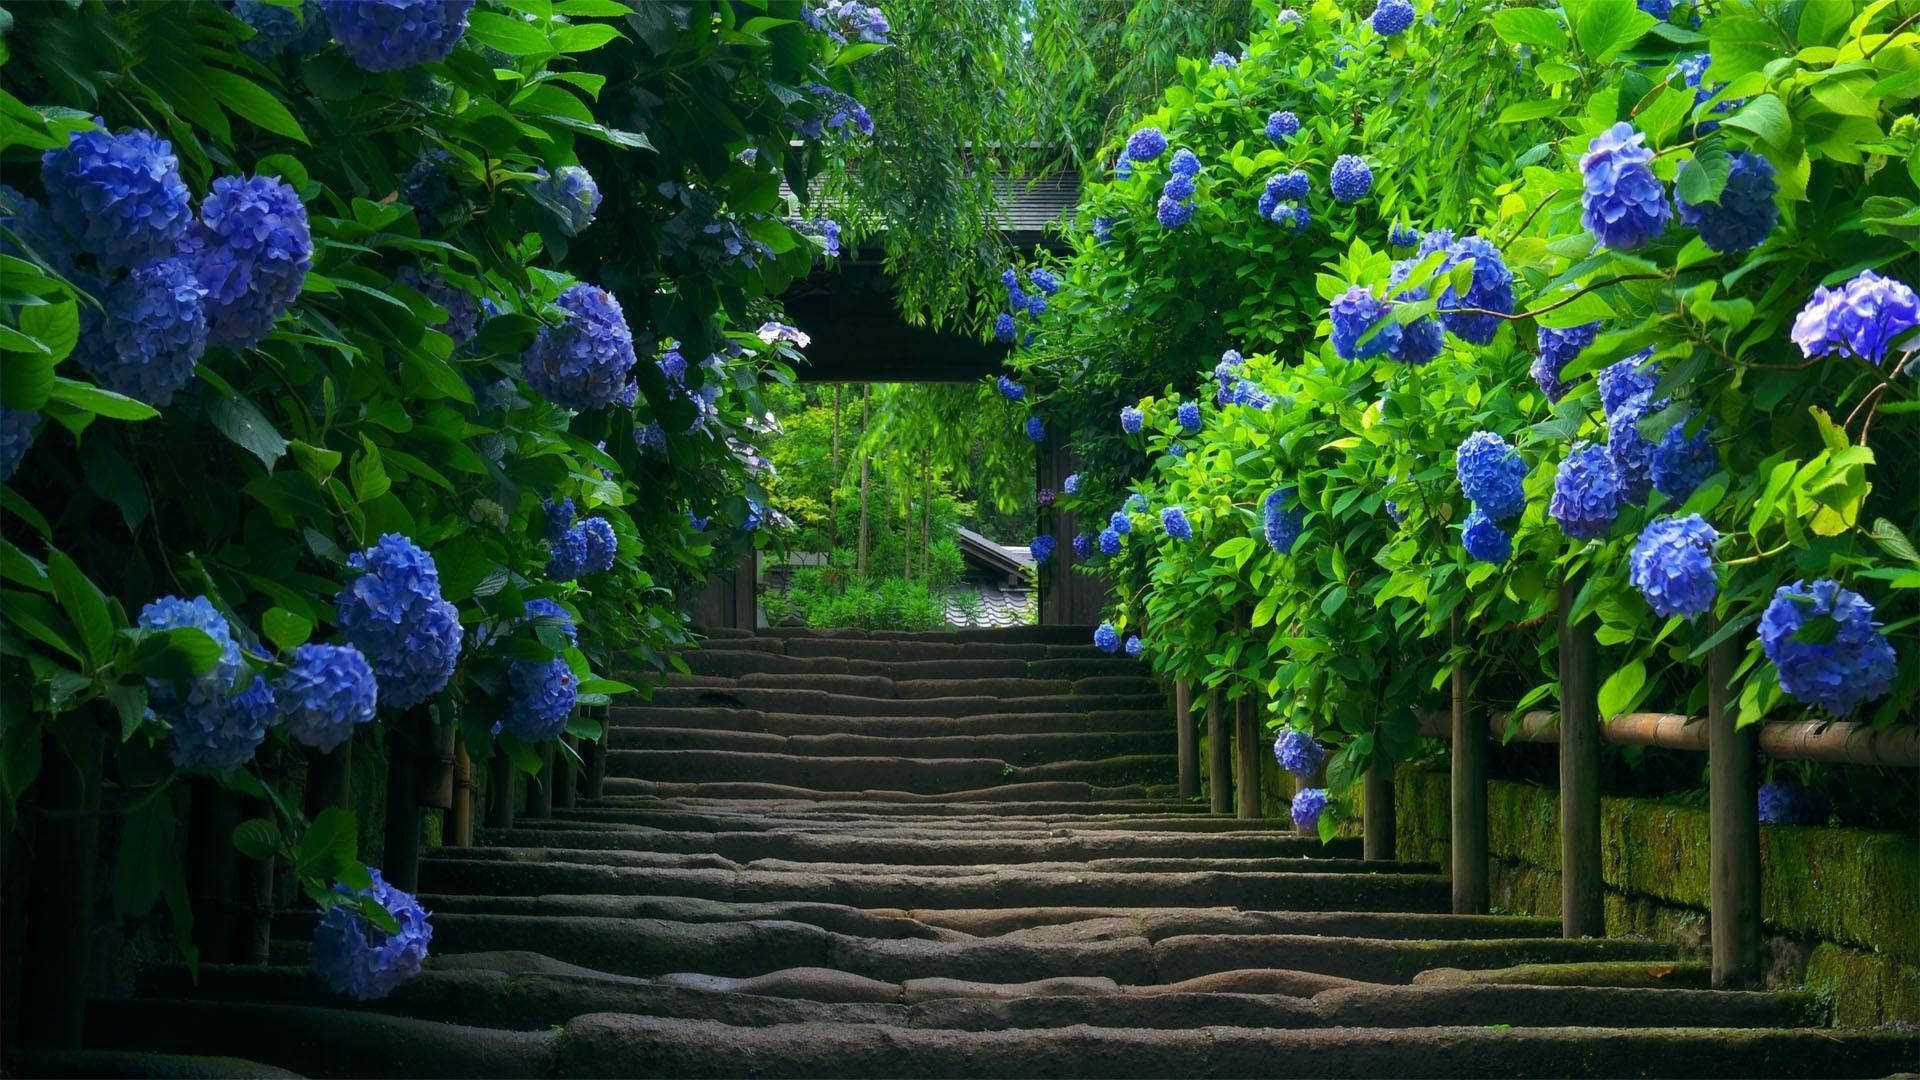 HD wallpaper of green garden with purple flowers surrounding stair path. 